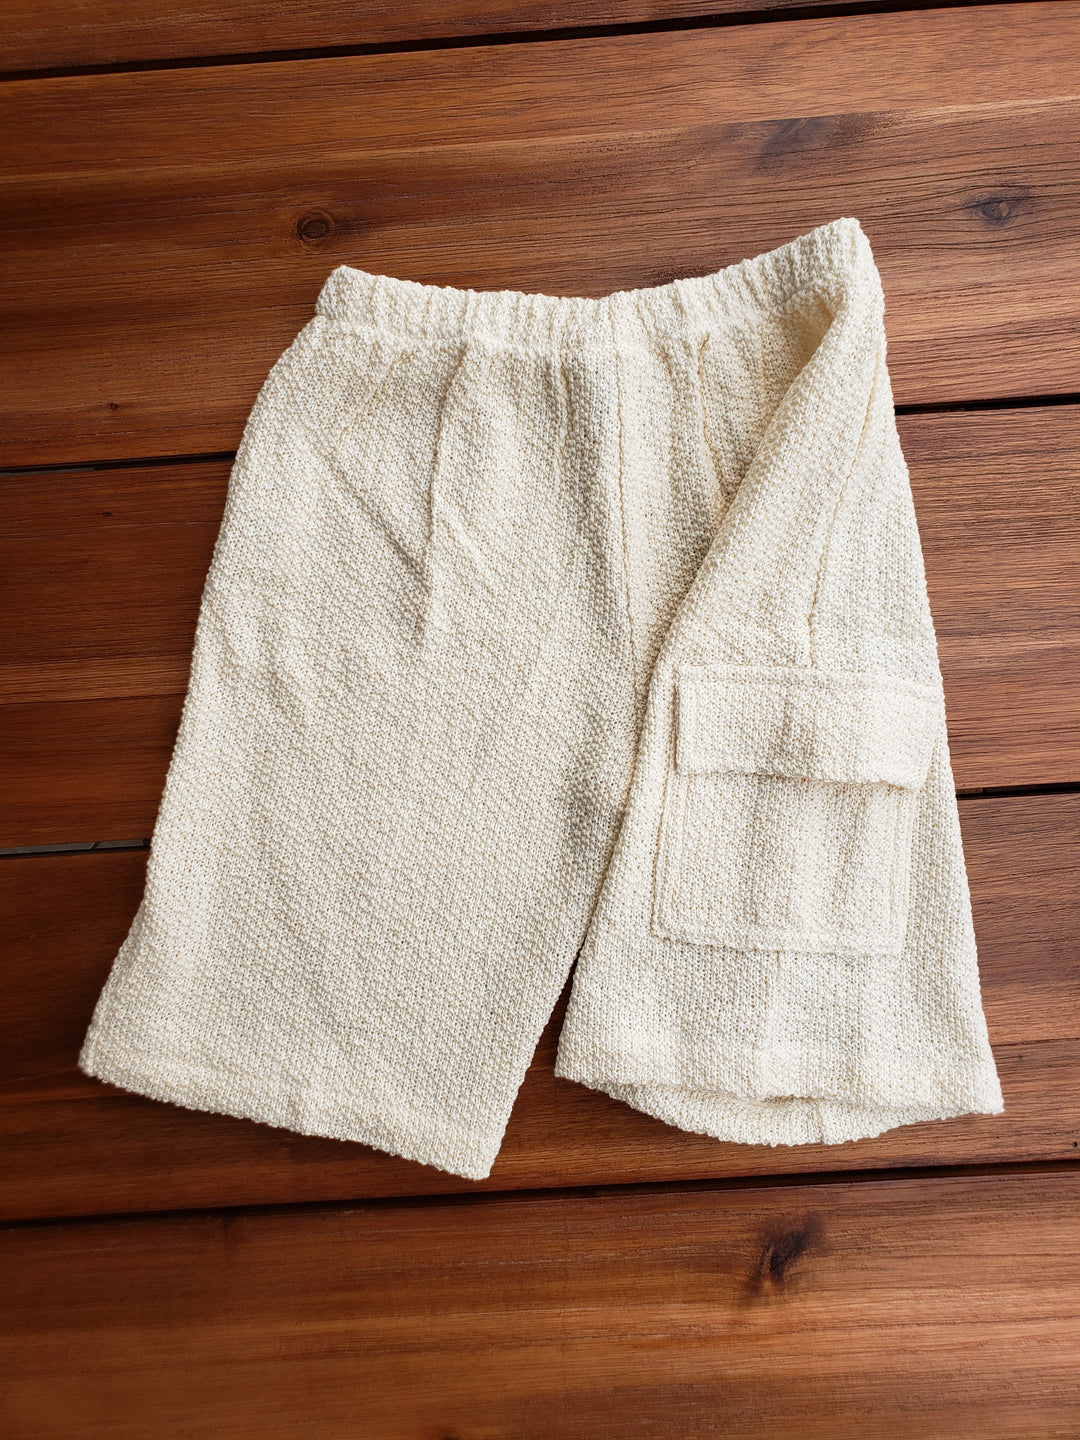 Liten Aventuris Collections. Looking for cool style and comfort for your little one? Our Tron Bermuda shorts got your boy covered! Made from knitted cotton, these stylish Bermudas are the perfect combo of comfort and cute.  With an elasticated waistband, one pocket, and a loose fit, these shorts are built to last in style and fabric! Barnkläder, Bomullskläder, Natural kläder. Flicka och pojken kläder. Barn kortbyxor, byxor, byxa.